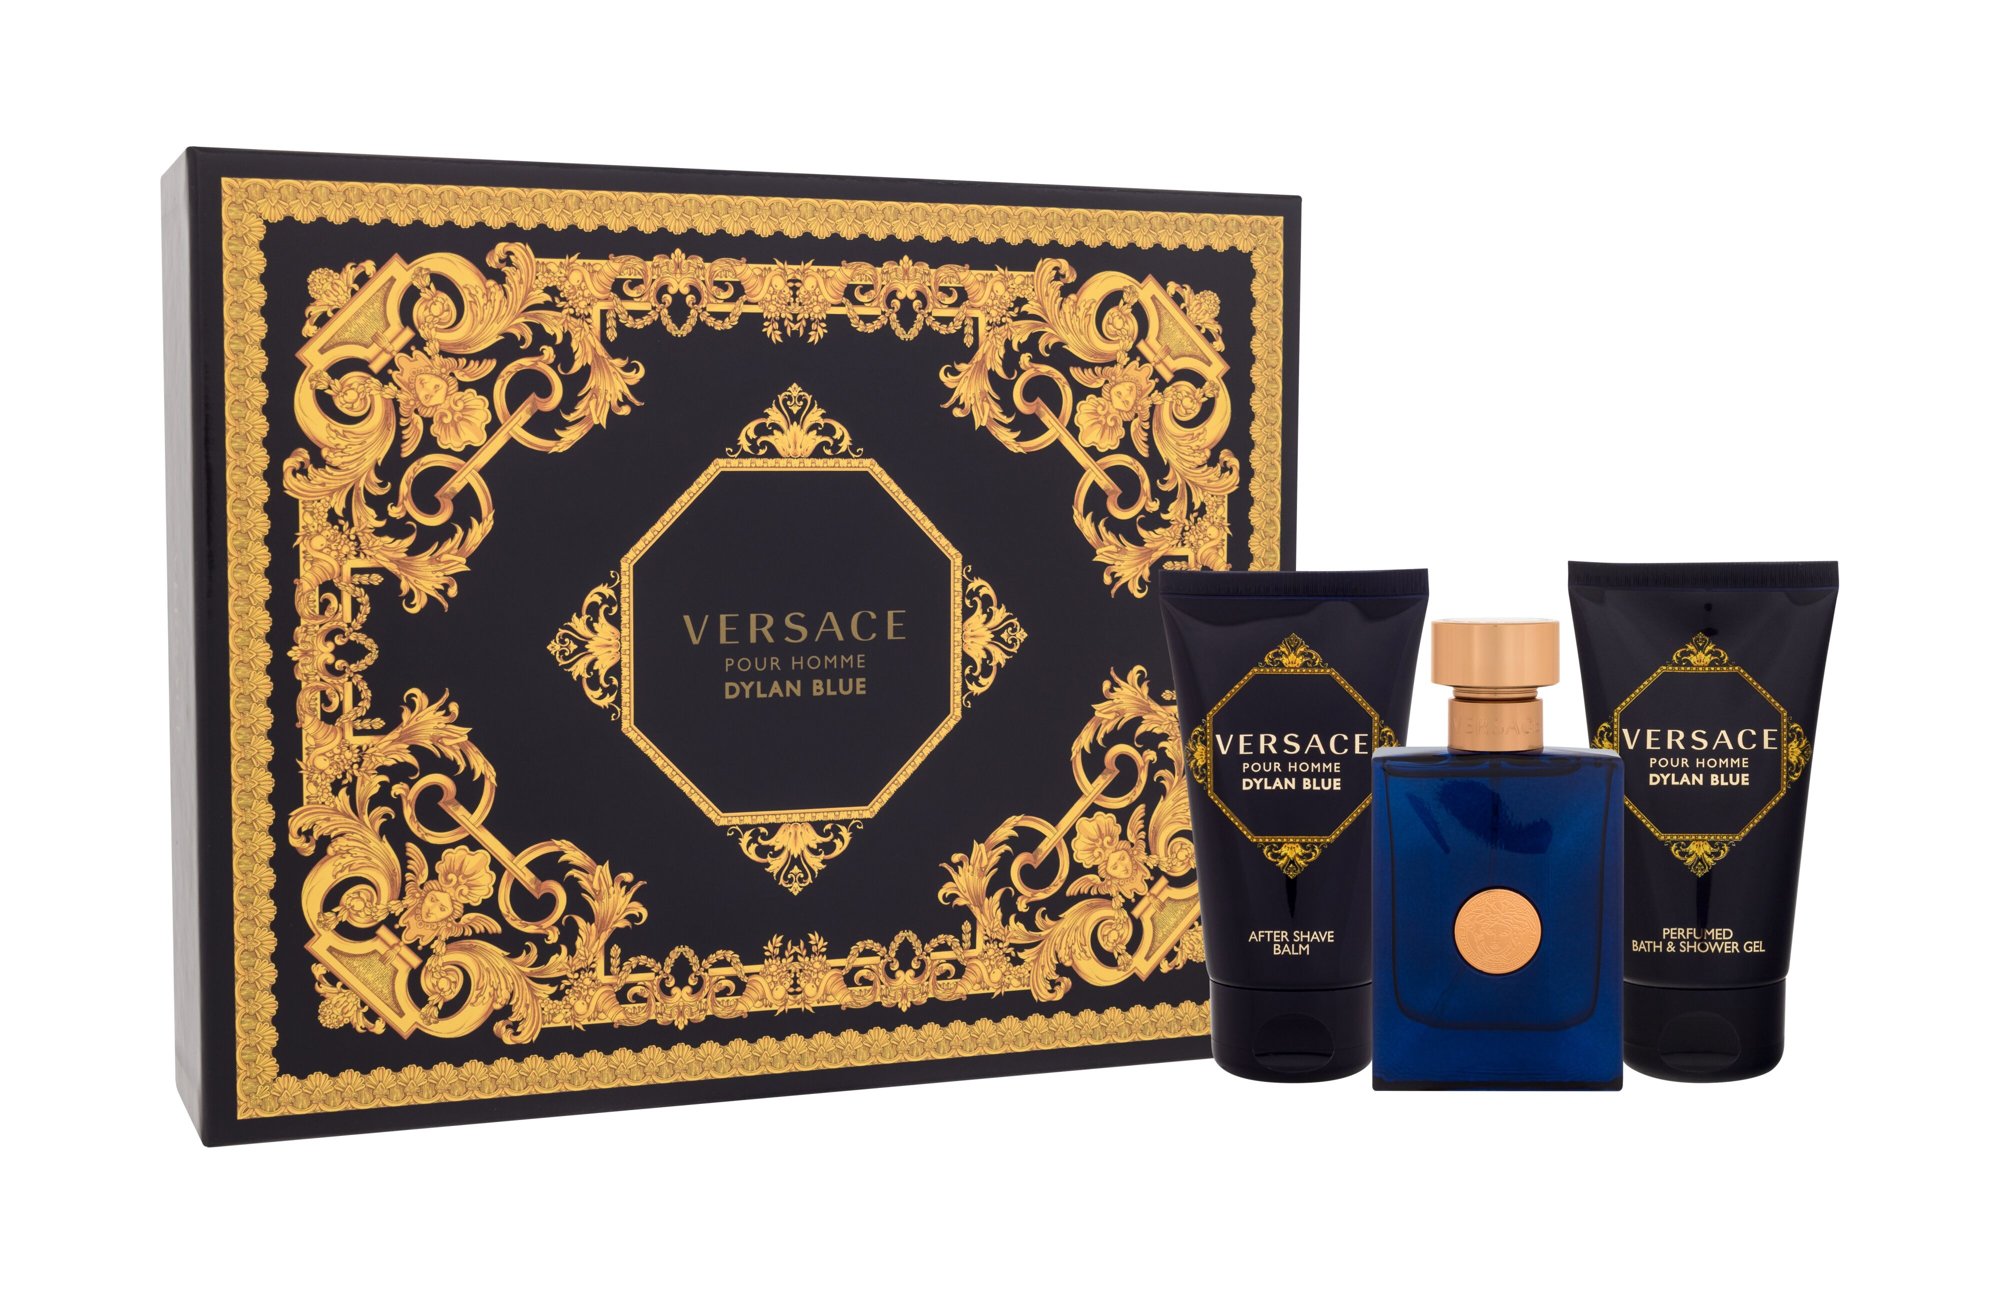 Versace Pour Homme Dylan Blue 50ml Edt 50 ml + Shower Gel 50 ml + Aftershave Balm 50 ml Kvepalai Vyrams EDT Rinkinys